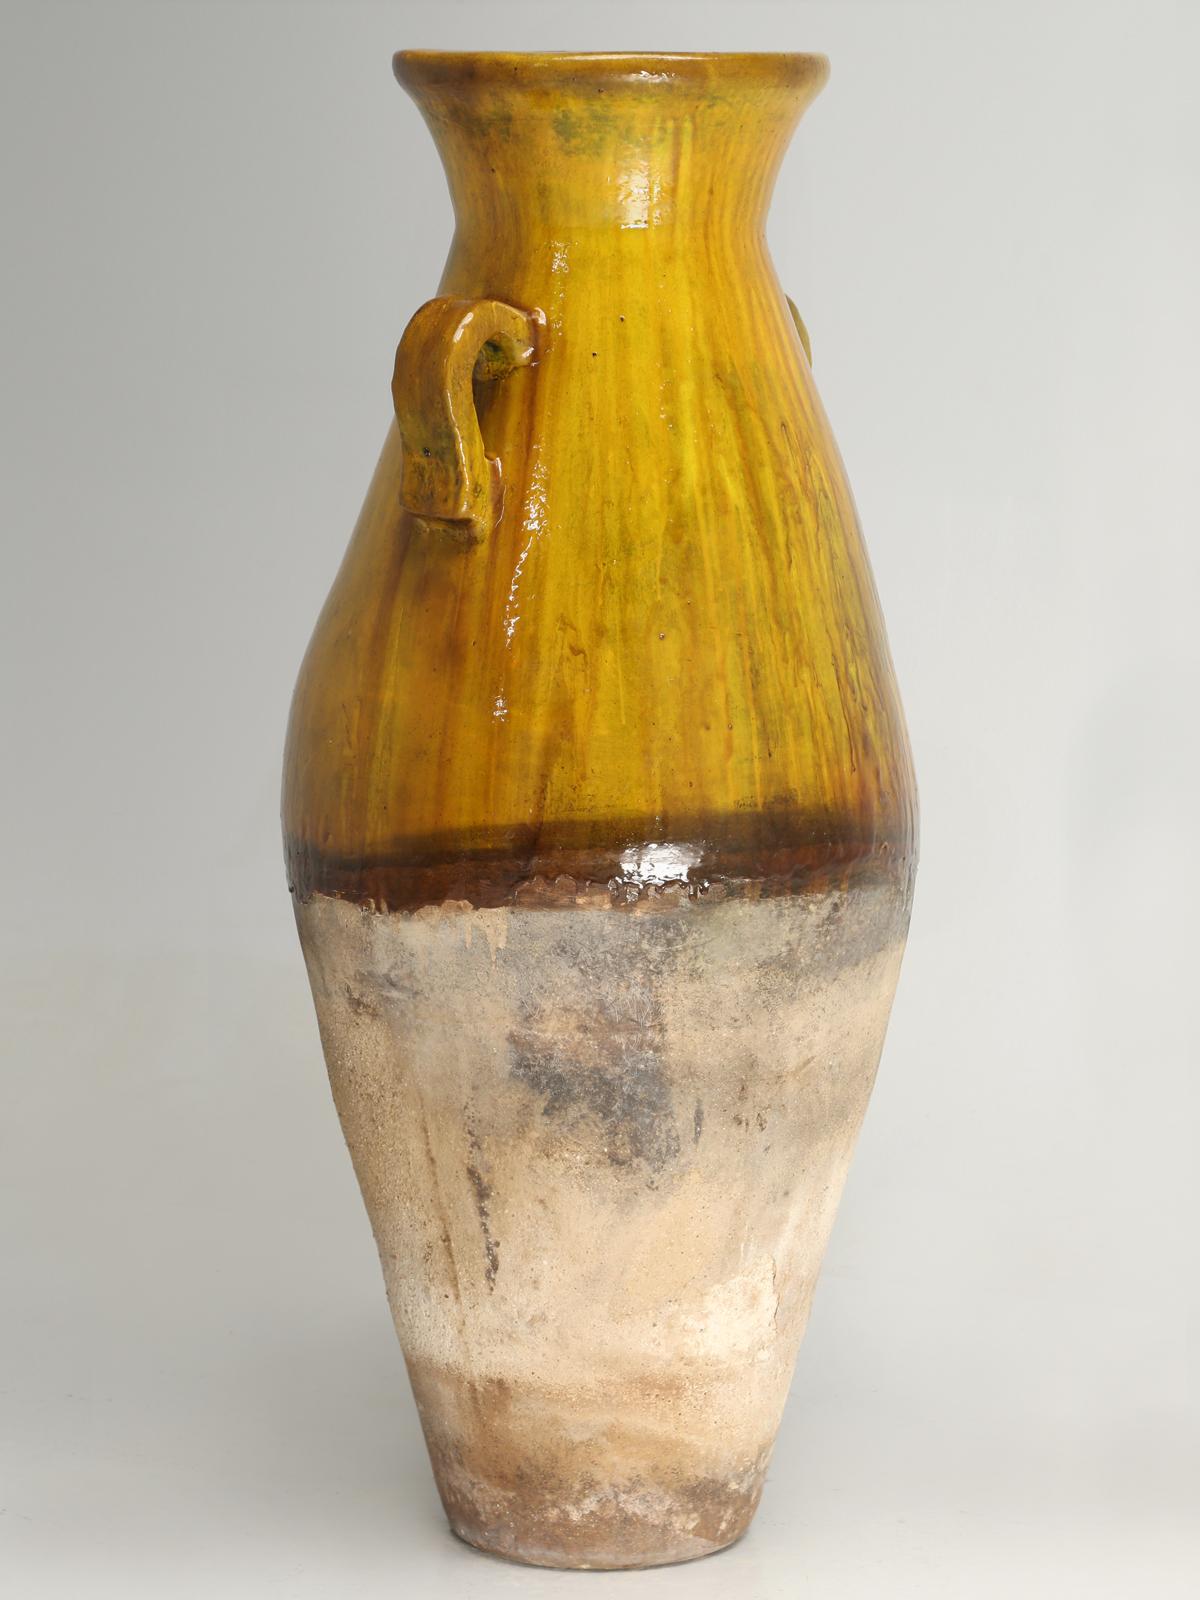 Commonly called an olive oil jar in the trade, but are actually an amphora, which is a type of container of a specific shape and dimension, beginning in the Neolithic Period, which ran from approximately 9000BC to 3500BC. Generally, Amphorae were